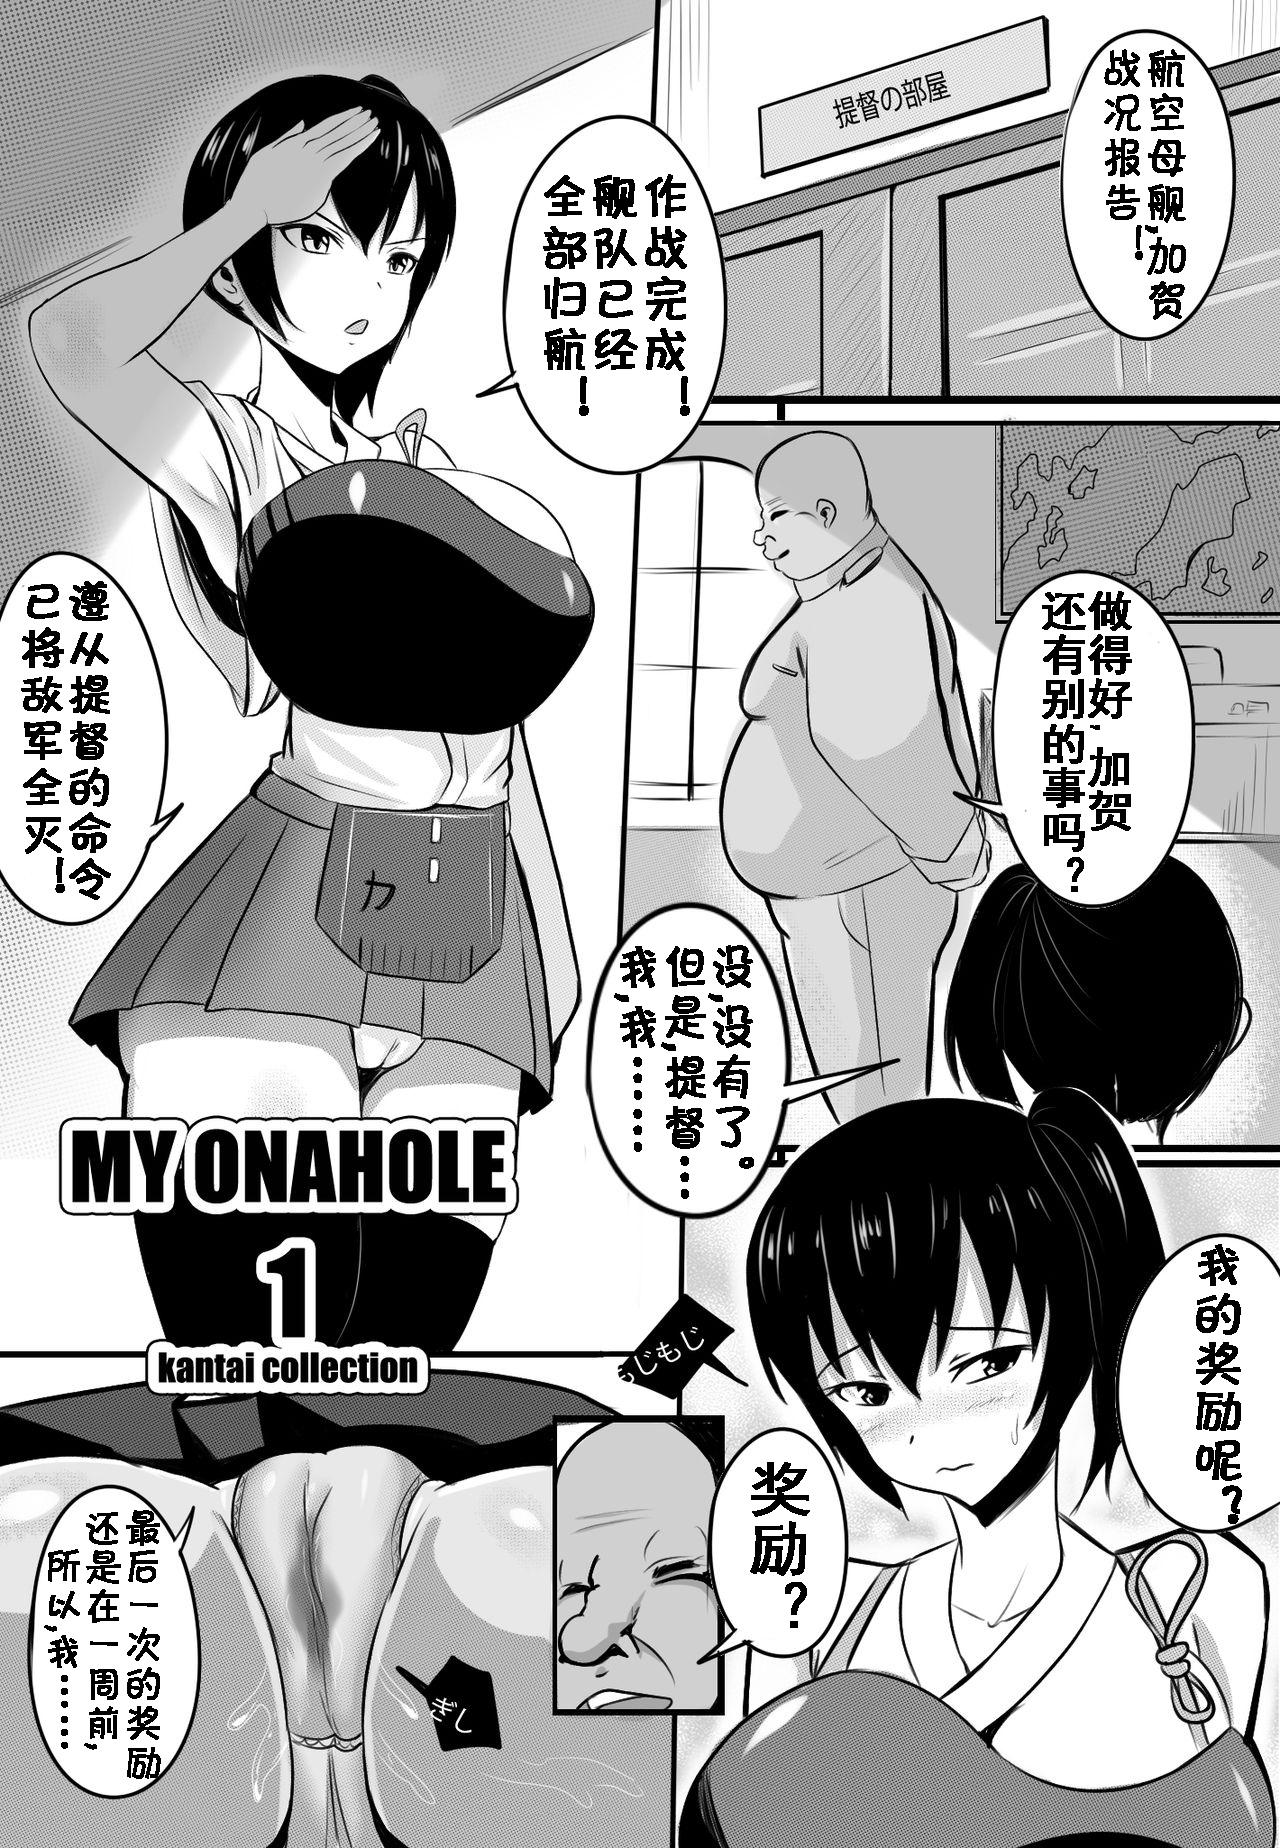 Mom My Onahole 1 - Kantai collection Hentai - Page 3